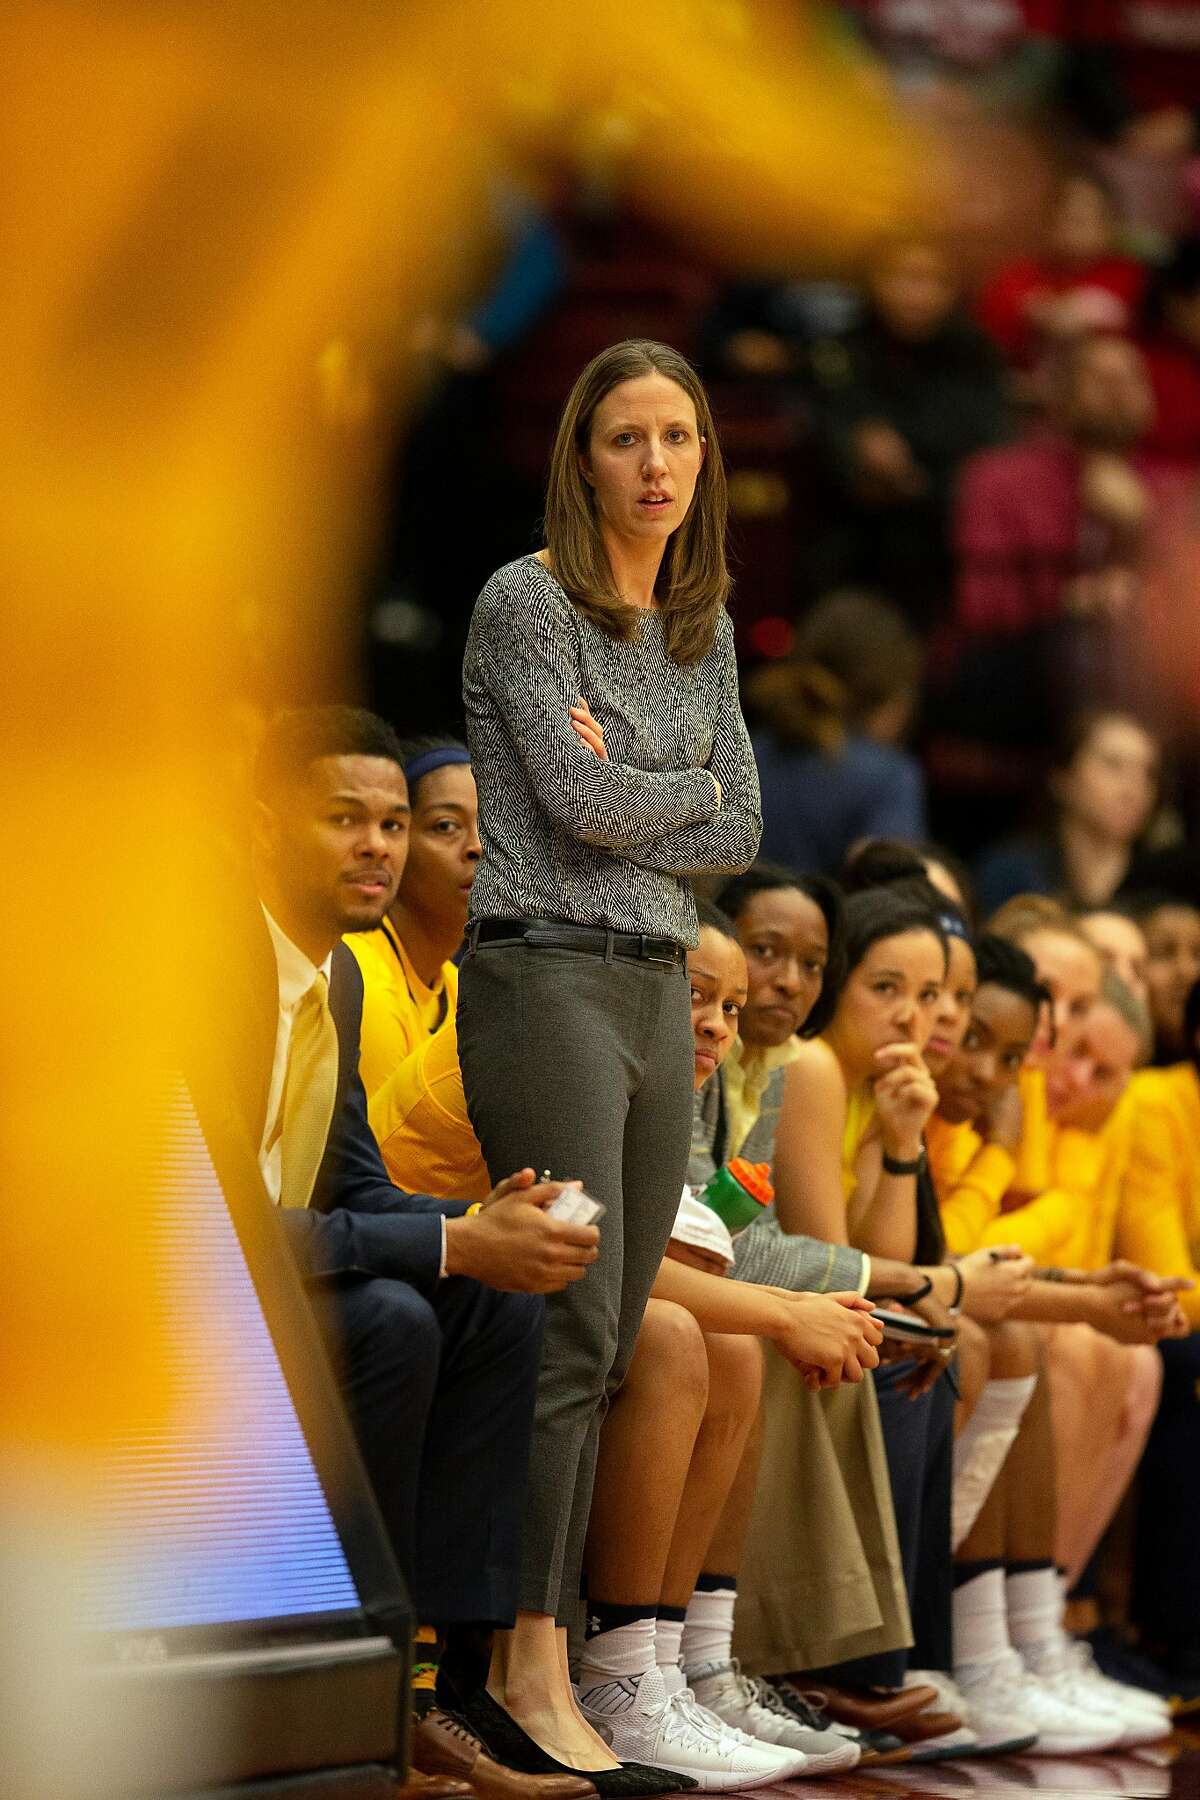 California head coach Lindsay Gottlieb watches her team take on Stanford during the first quarter of an NCAA women's basketball game on Saturday, Feb. 2, 2019 in Stanford, Calif.